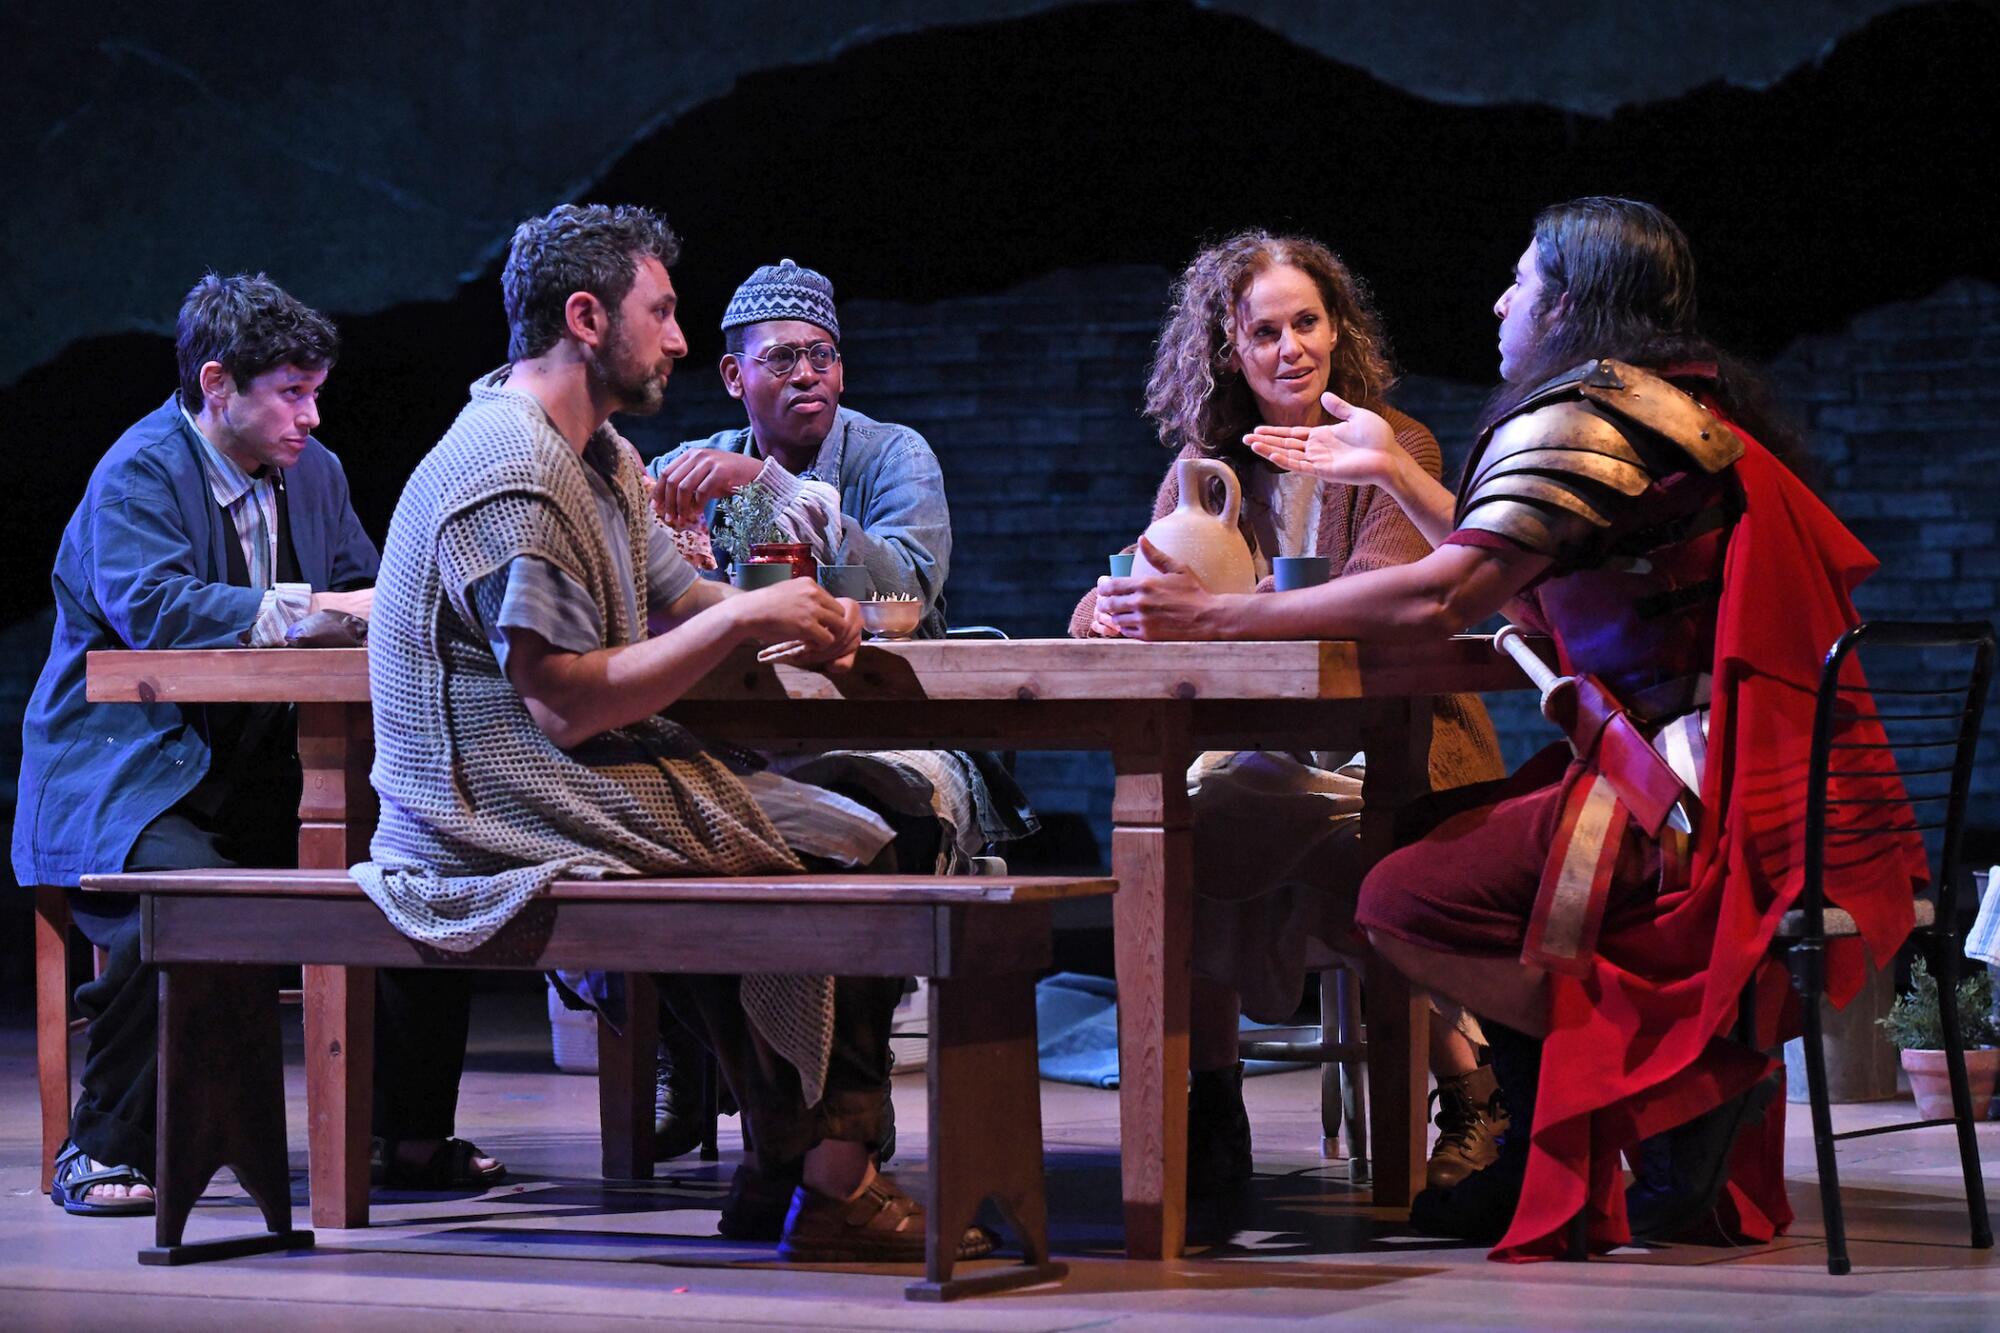 A person dressed as a Roman centurion talks to four people sitting around a table onstage